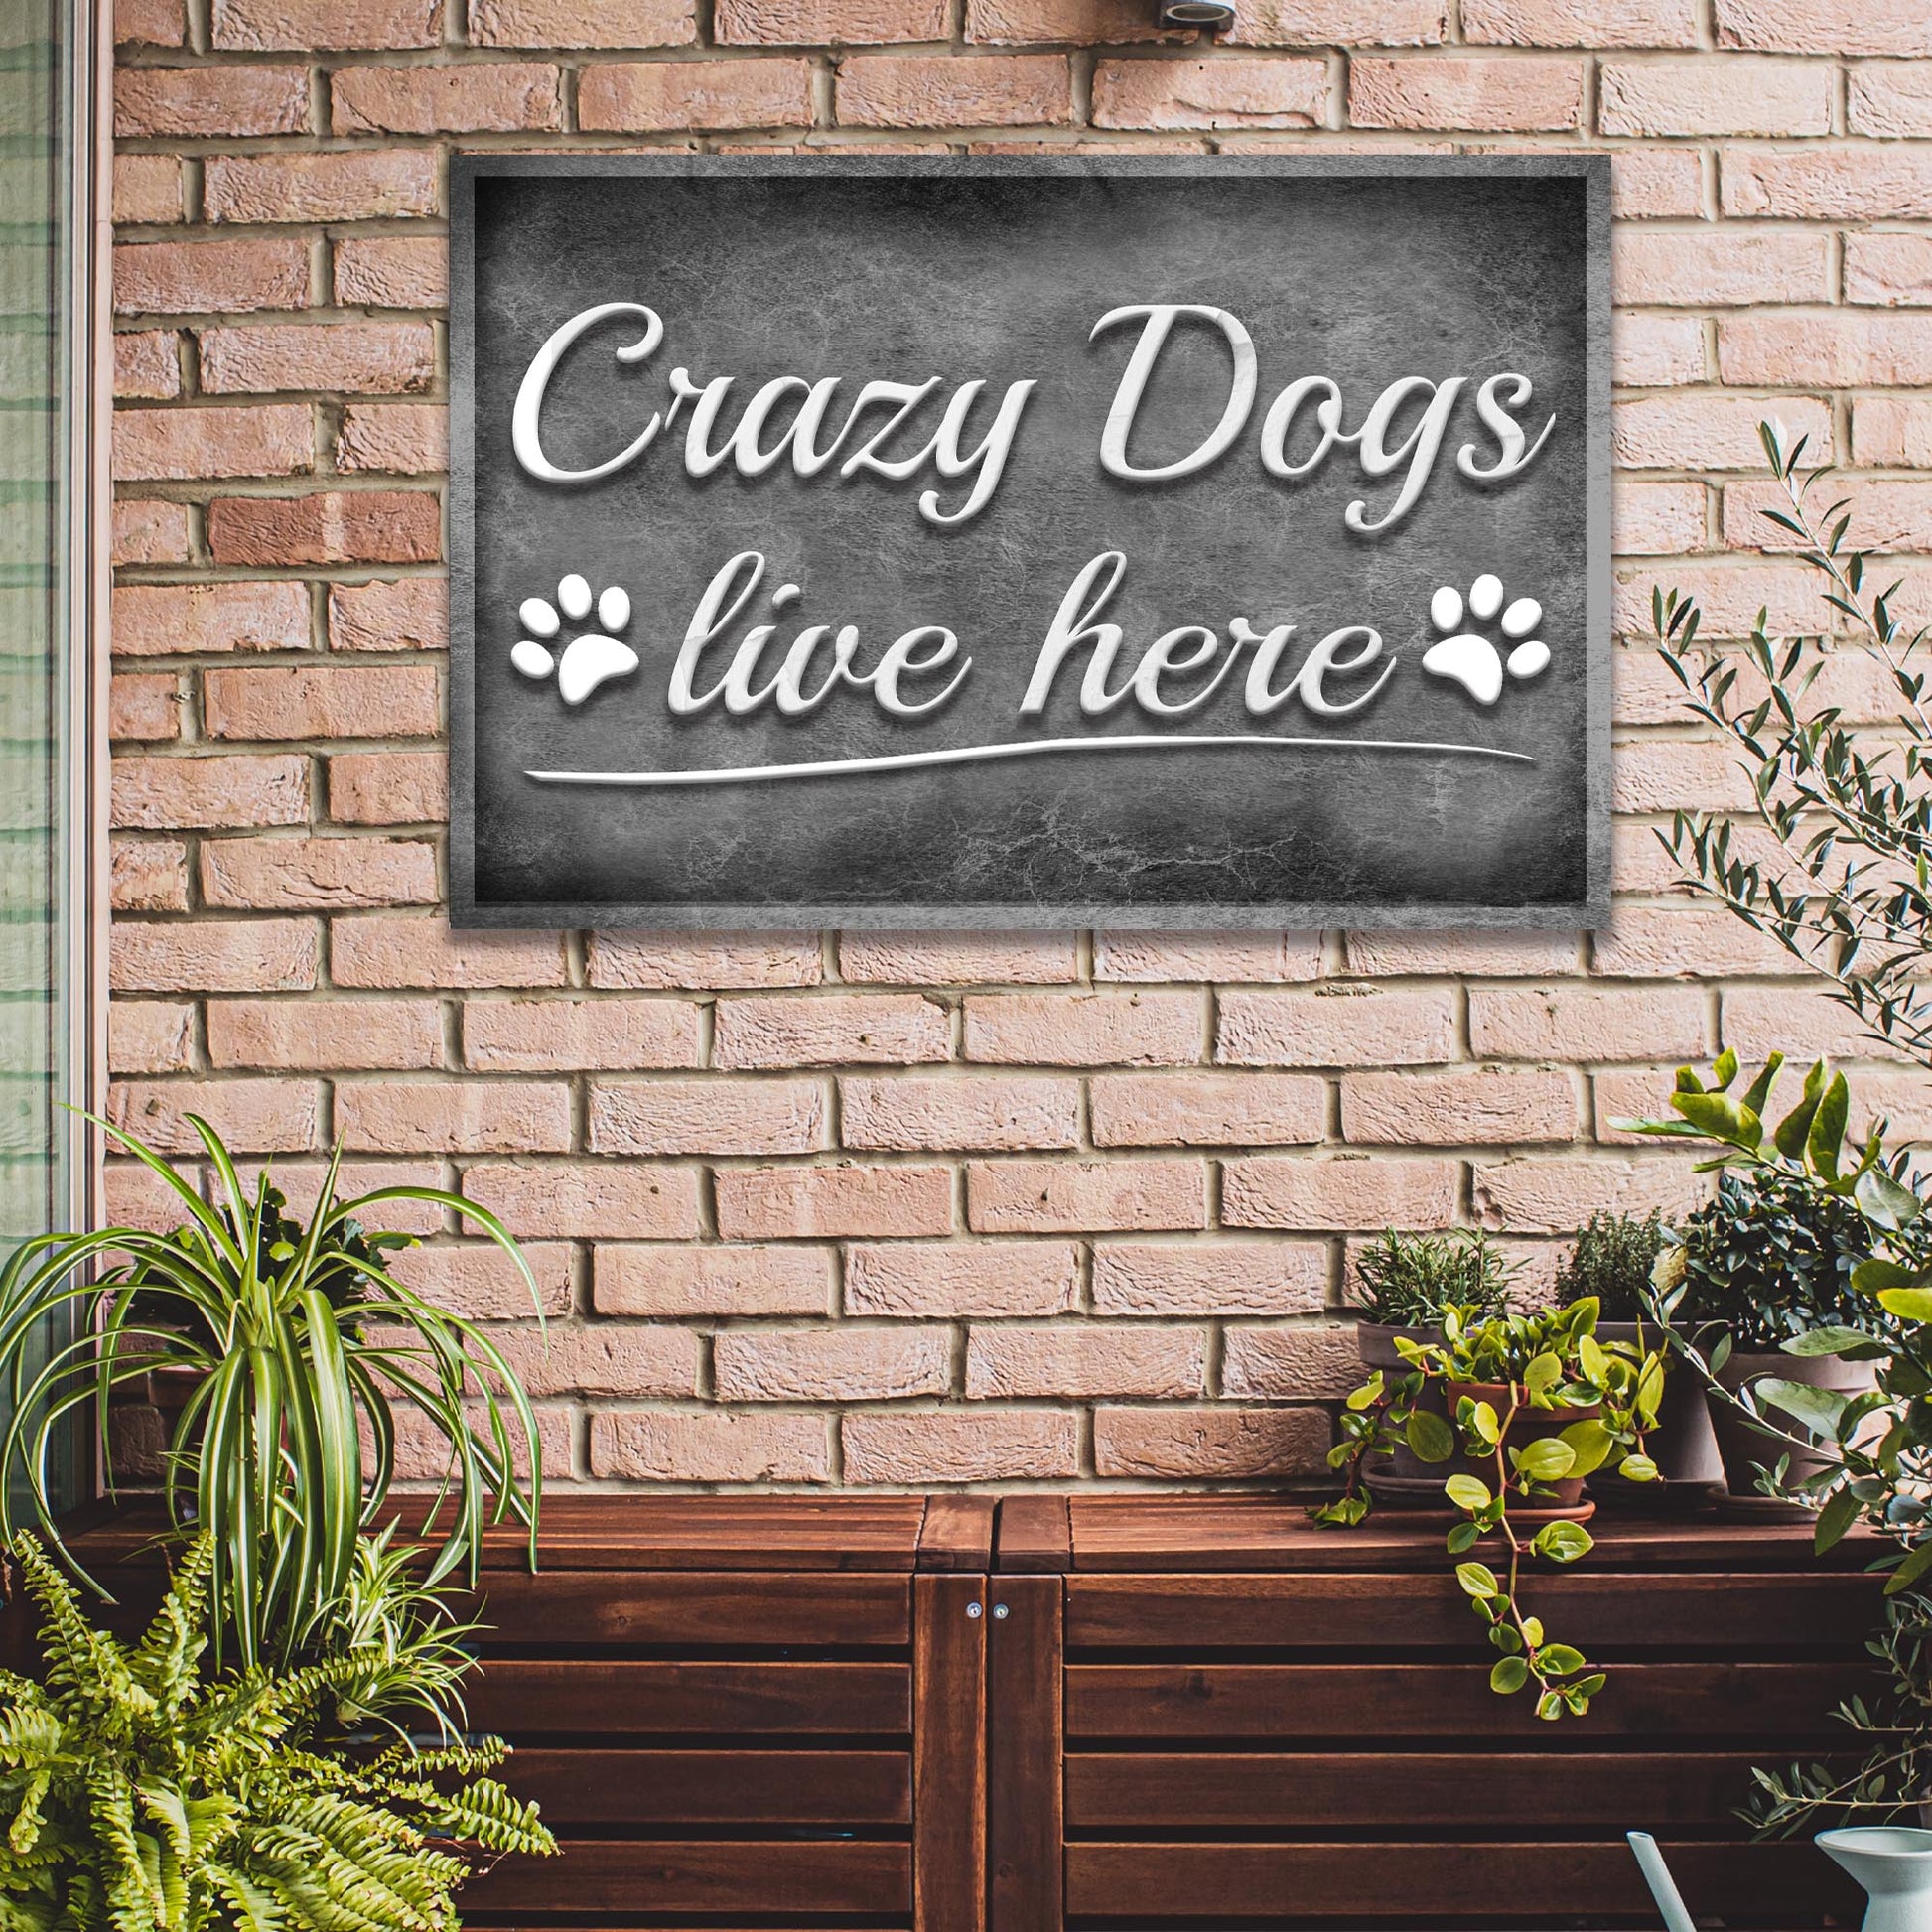 Crazy Dogs Live Here Sign II - Image by Tailored Canvases